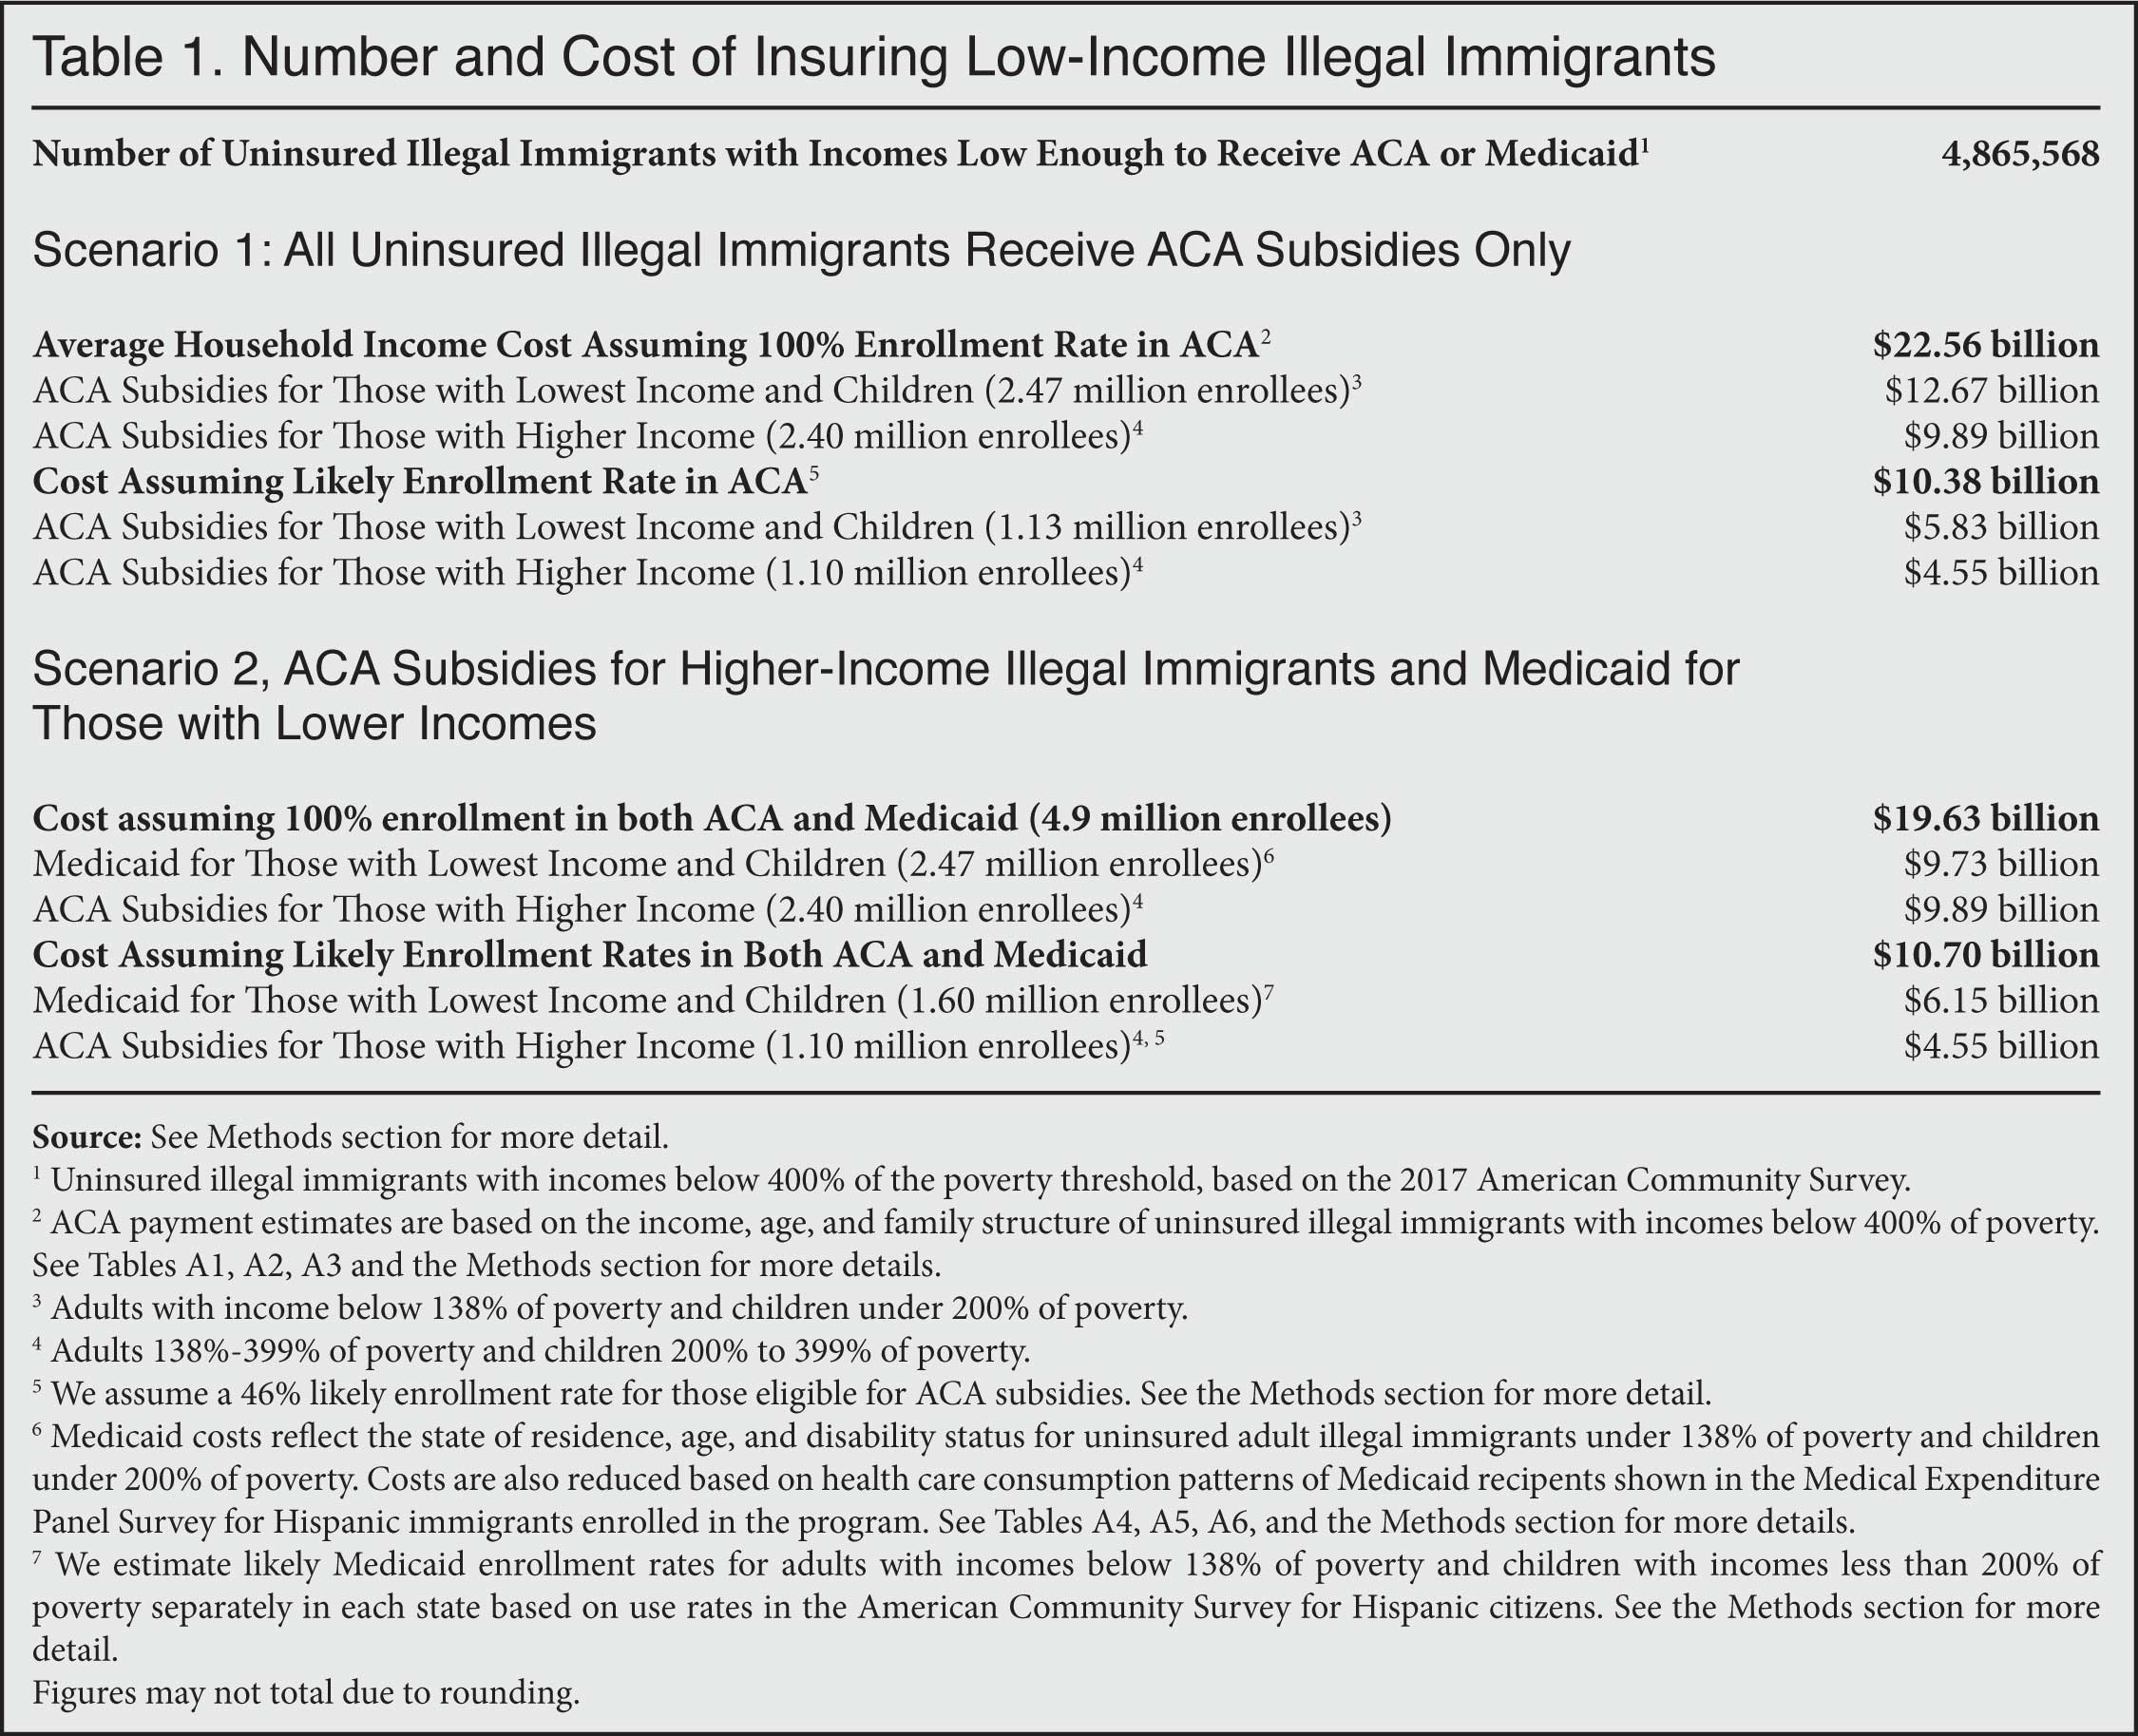 Table: Number and Cost of Insuring Low Income Illegal Immigrants